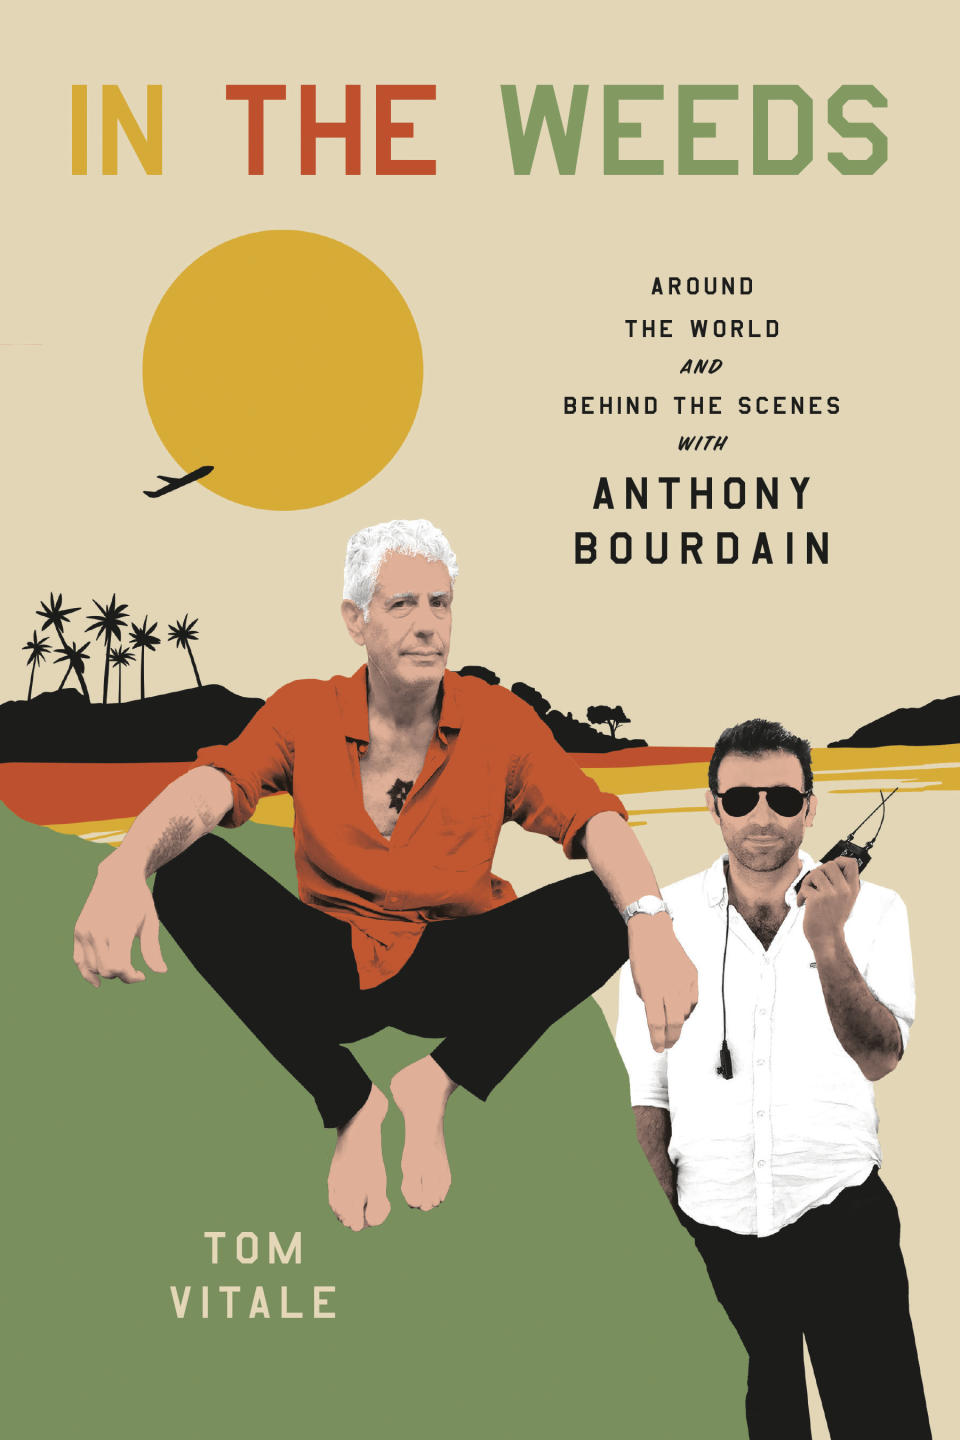 This photo shows the book cover of “In the Weeds: Around the World and Behind the Scenes with Anthony Bourdain” by Tom Vitale. (Hachette Books via AP)